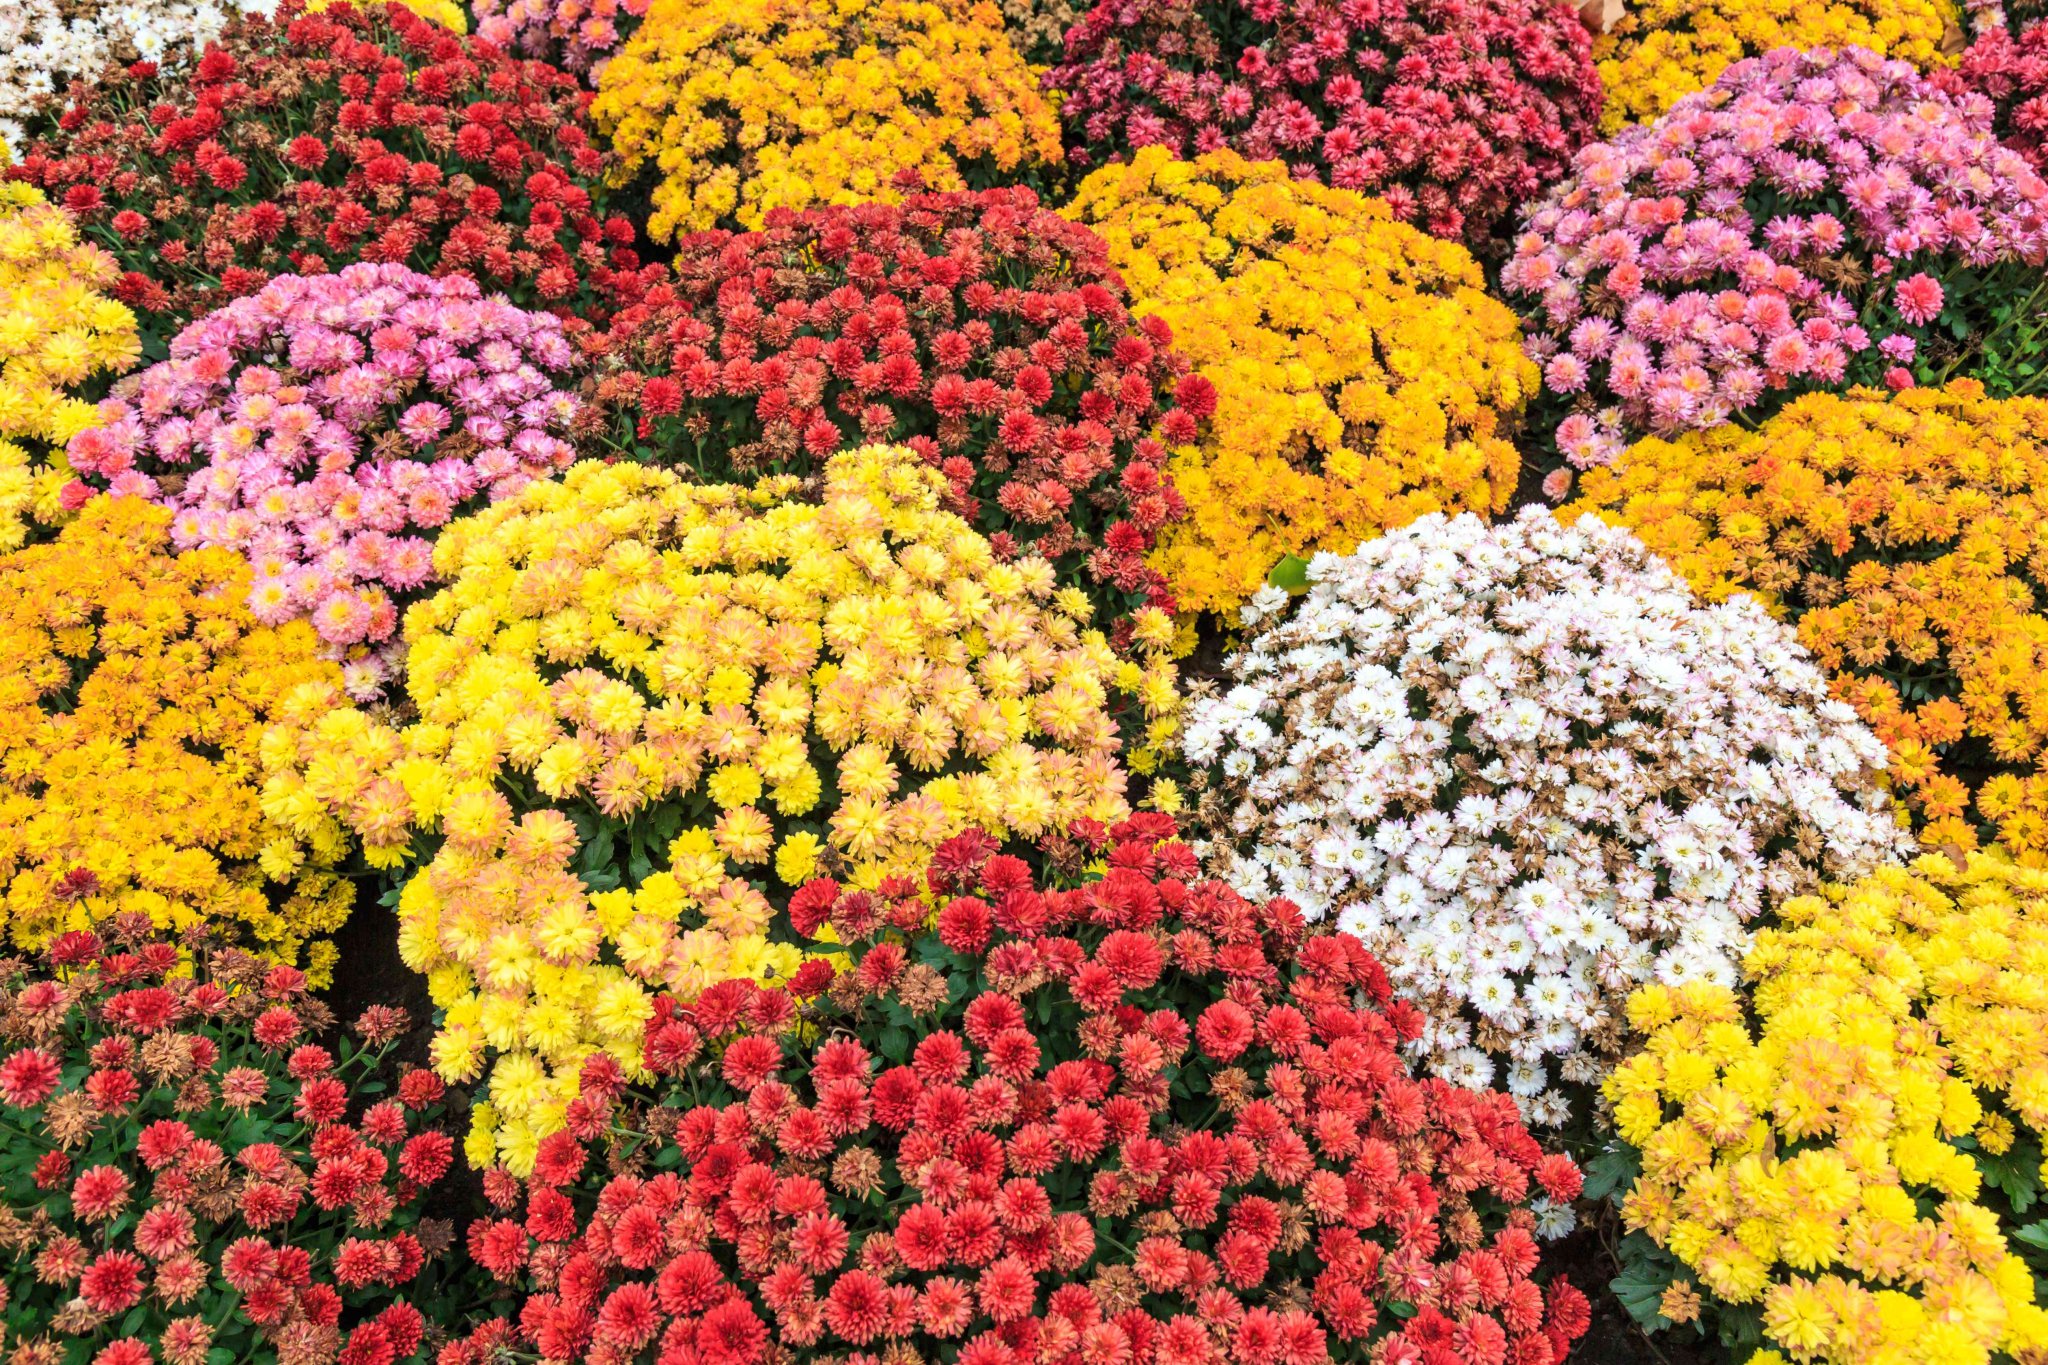 How Long Do Mums Last and When Do They Bloom?